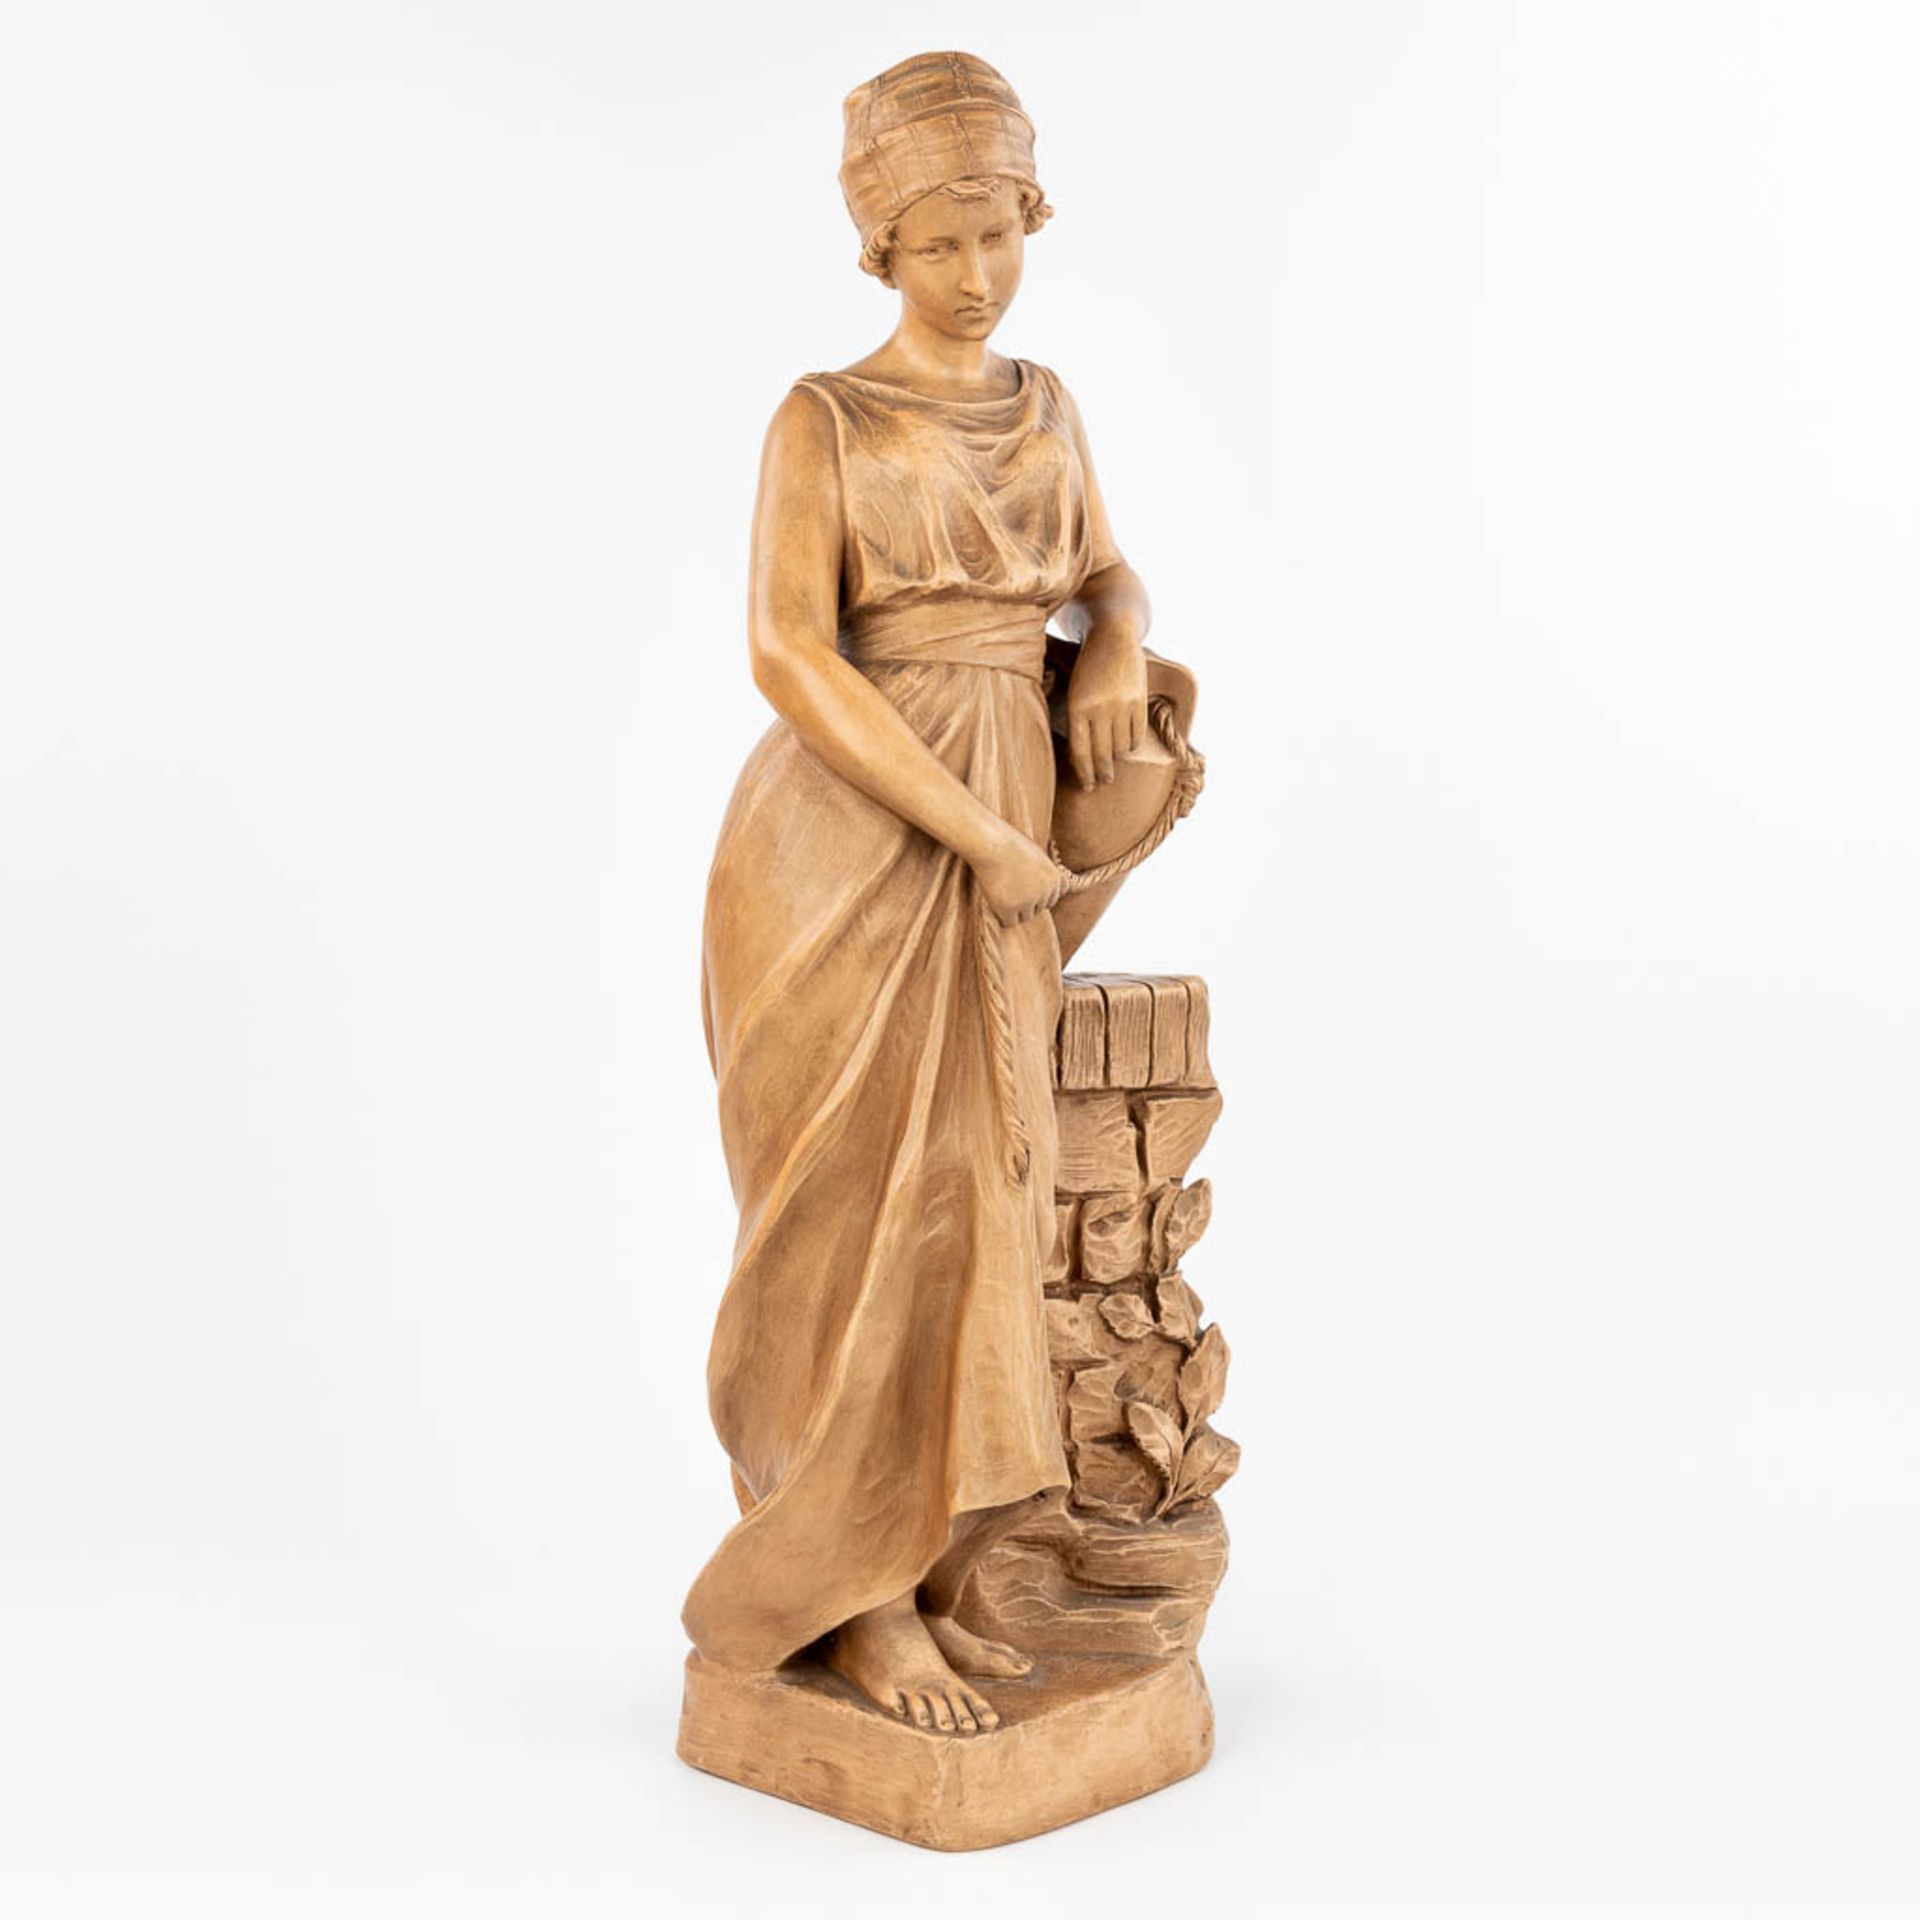 Richard AURILI (1834-c.1914) 'The Water carrier,' a figurine made of terracotta. (H:75,5 cm) - Image 5 of 12